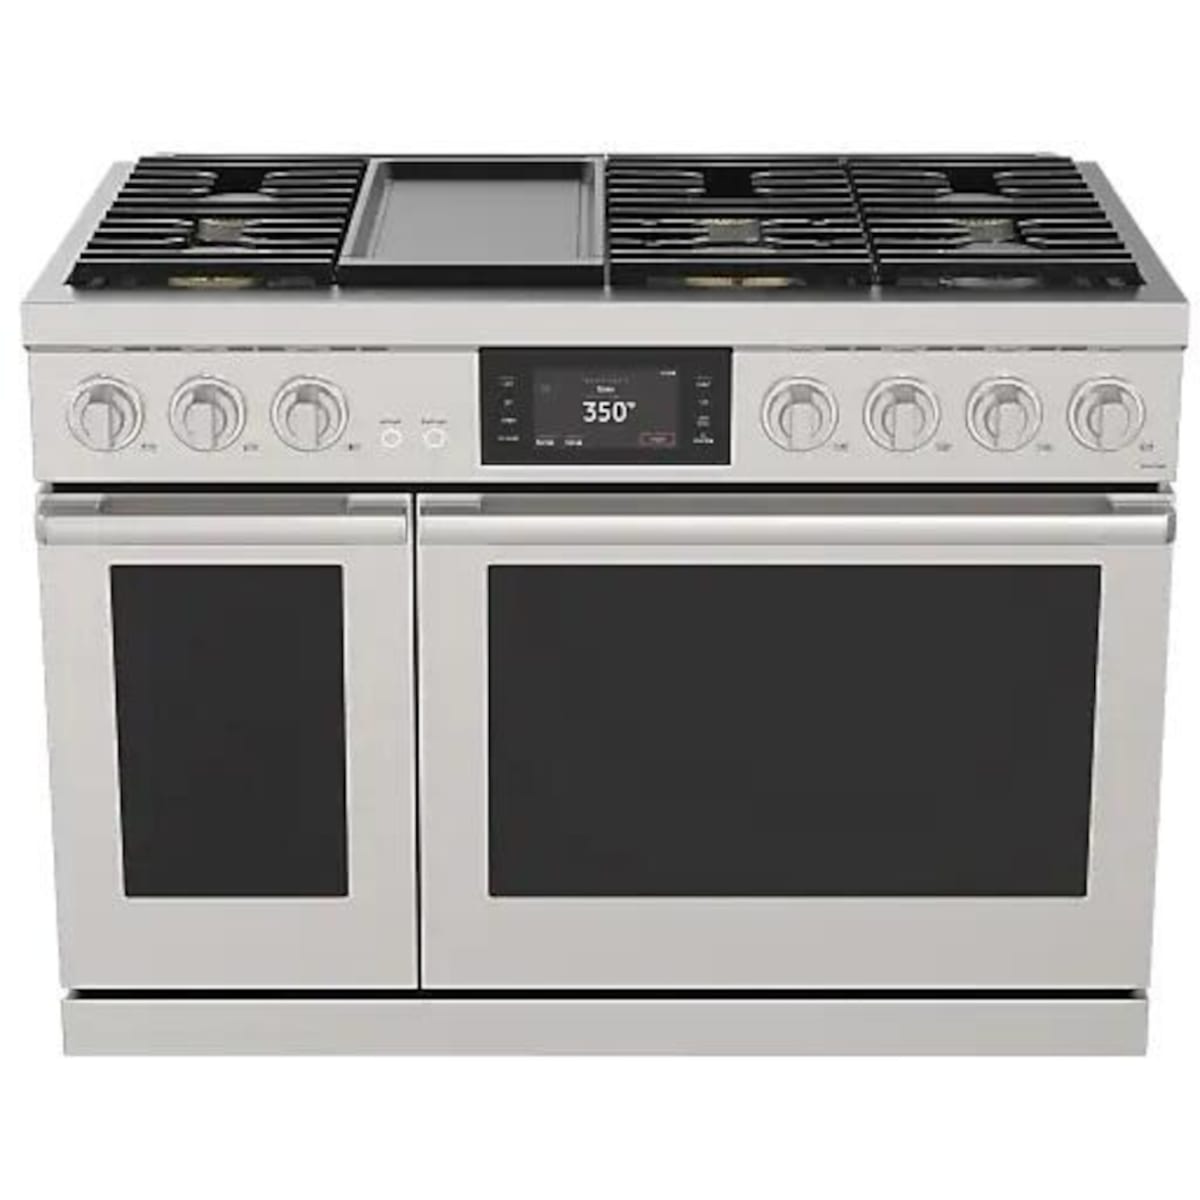 Dacor Cooktops Cooking Appliances - DTG36P875N